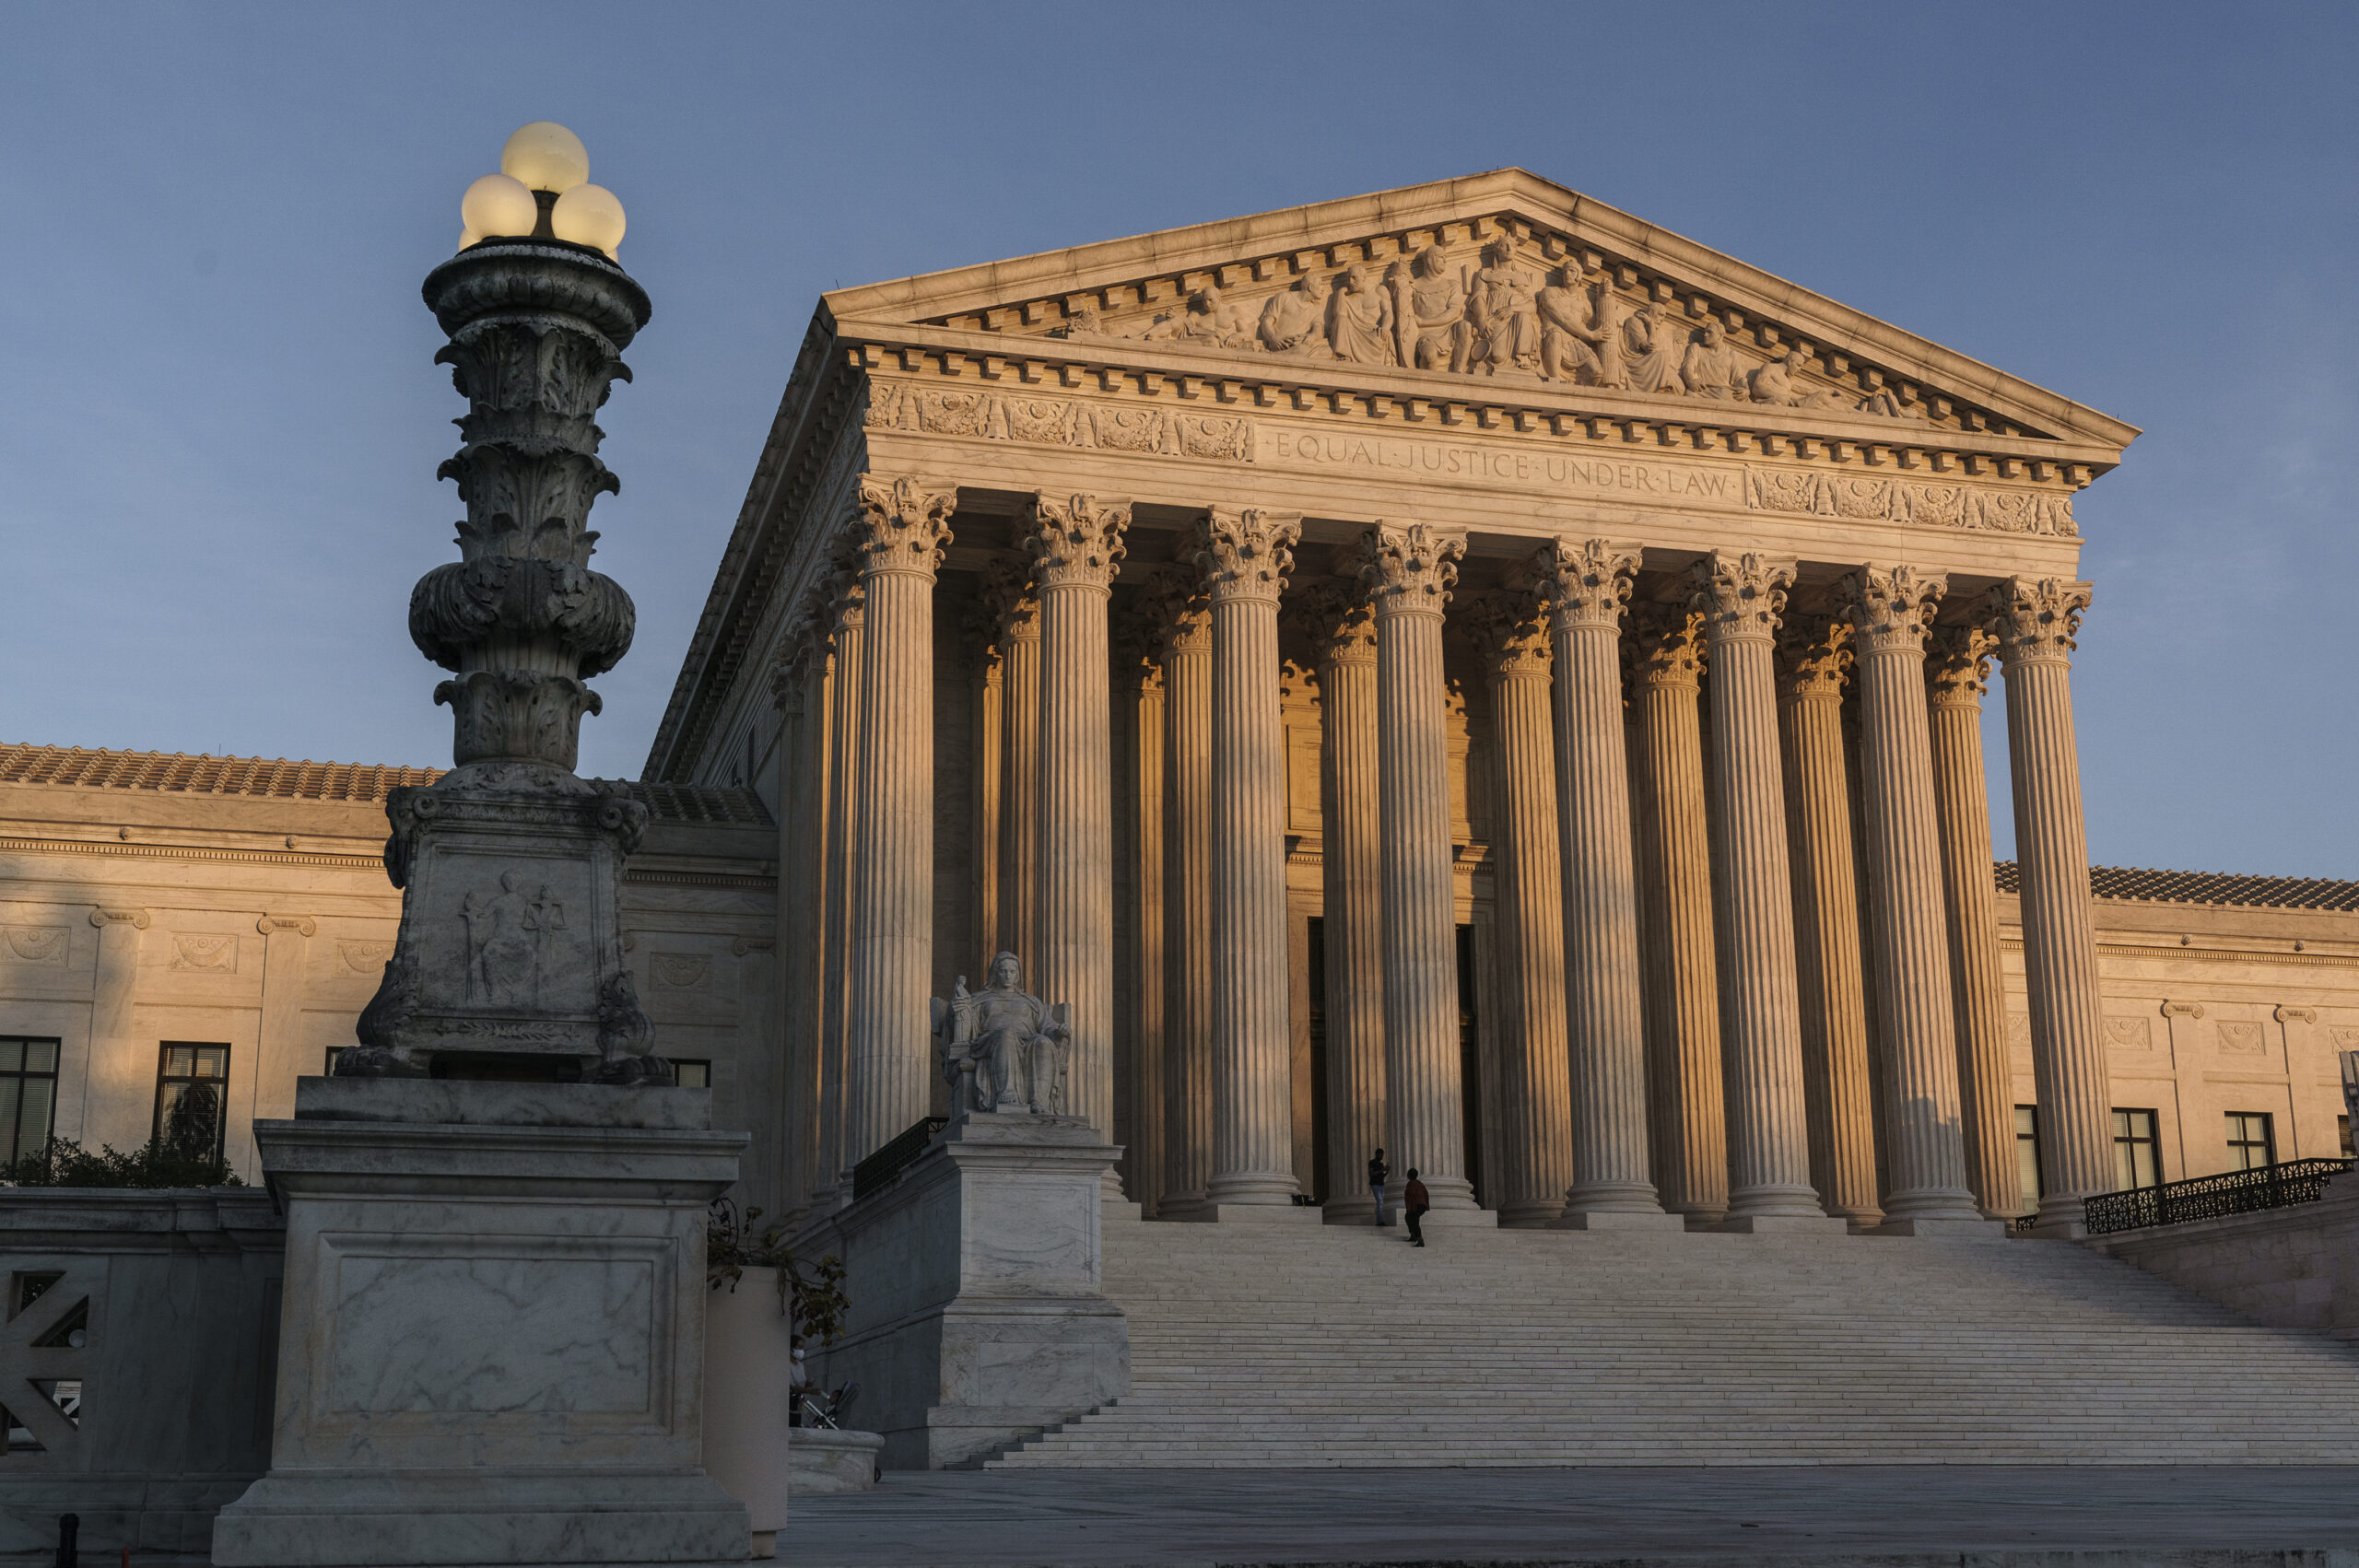 FILE - In this Nov. 6, 2020, file photo the Supreme Court is seen as sundown in Washington. The Supreme Court says it will not hear a case out of Pennsylvania related to the 2020 election, a case that had lingered while similar election challenges had already been rejected by the justices. The high court directed a lower court to dismiss the case as moot. (AP Photo/J. Scott Applewhite, File)